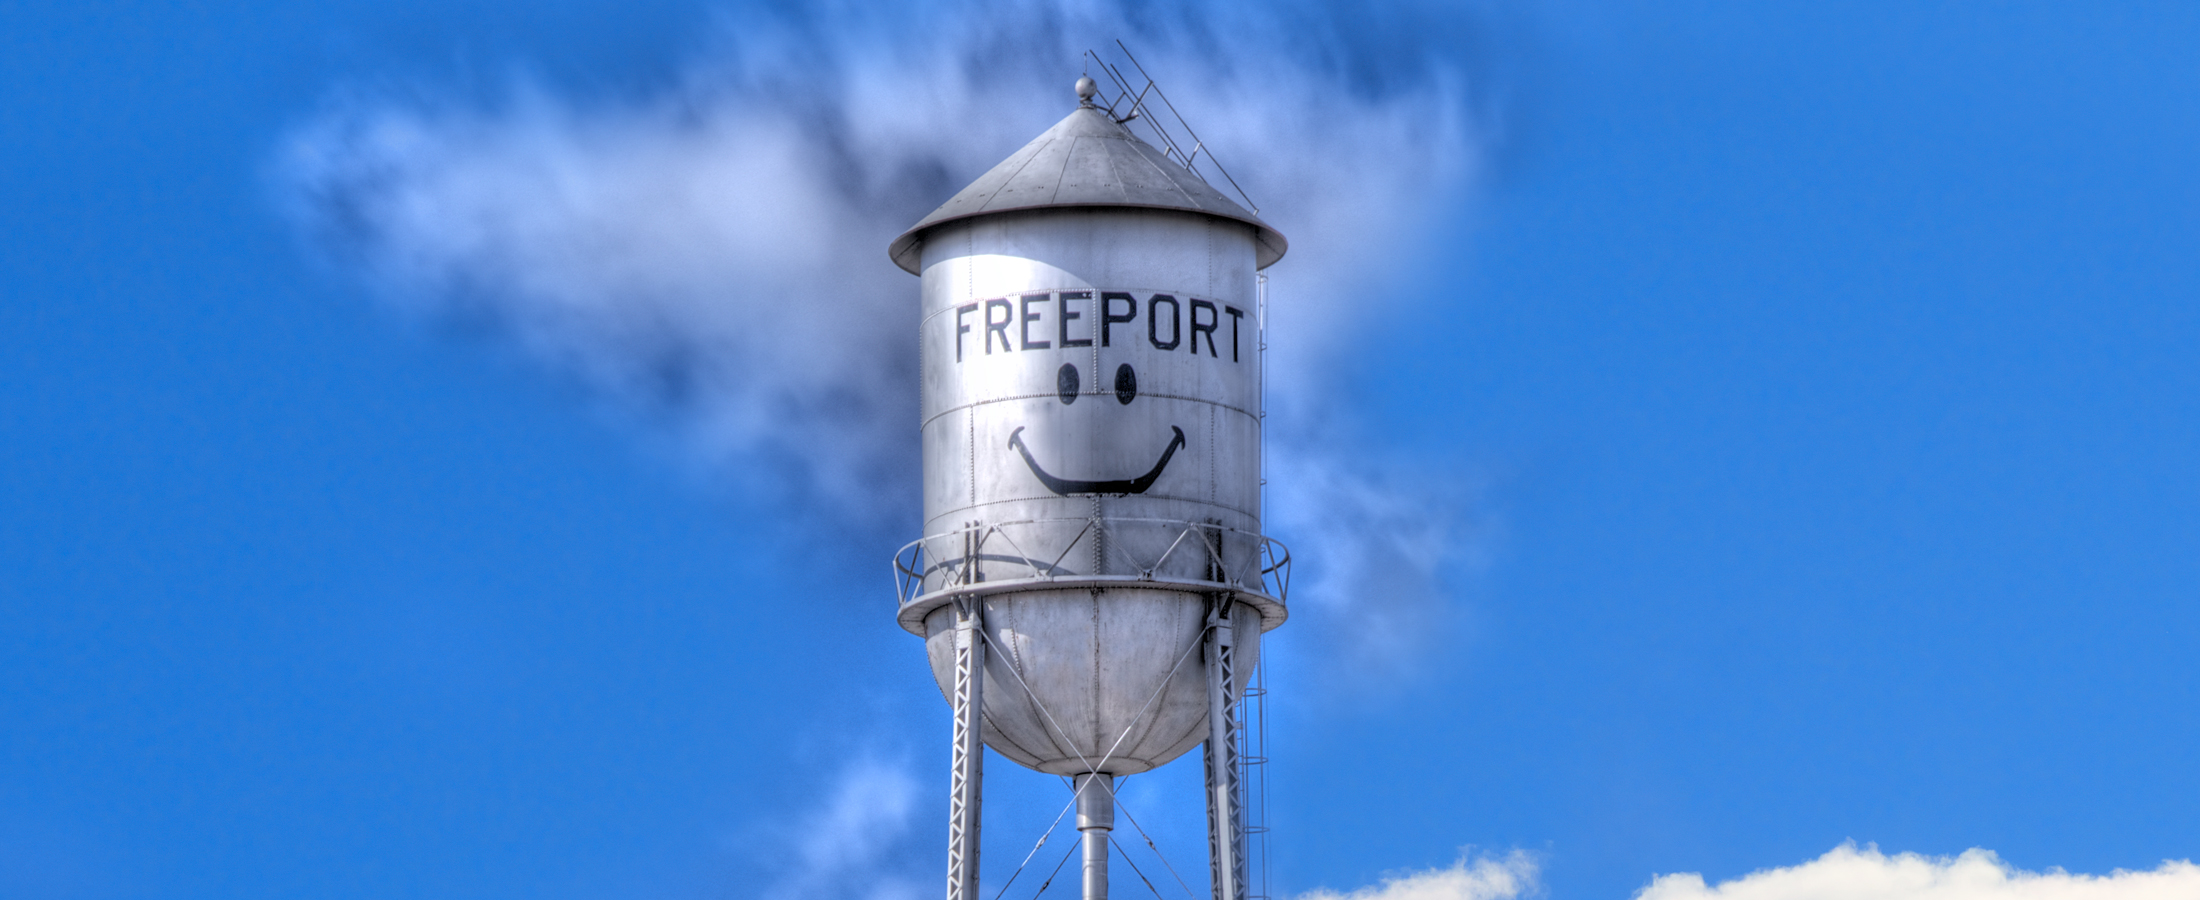 Water Tower Smiles by Barry Weber